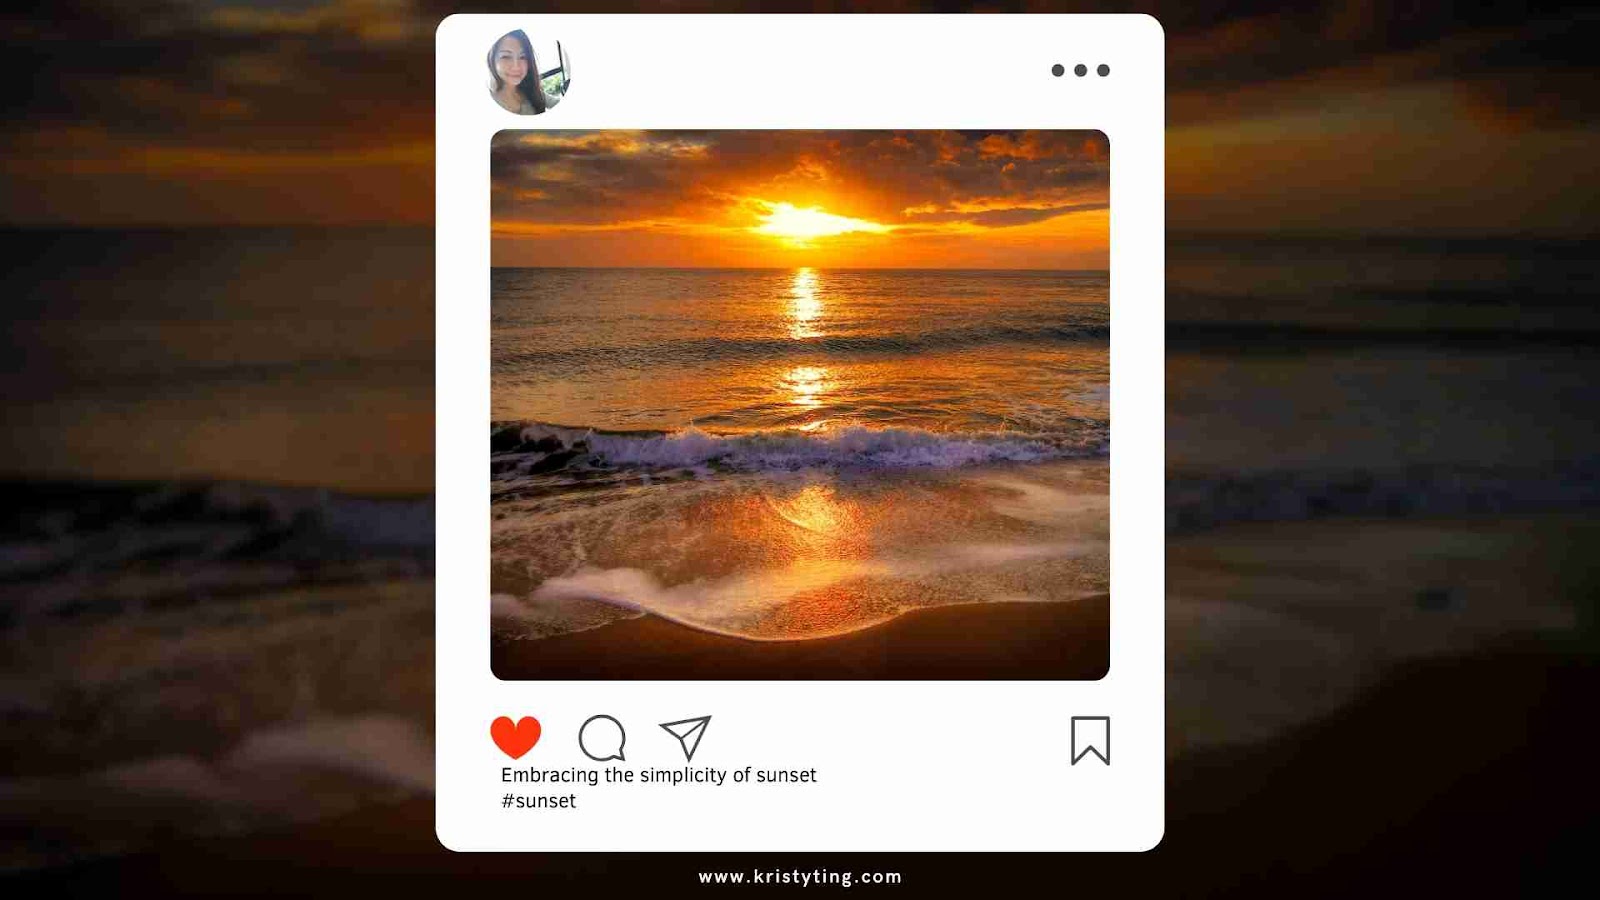 Sunset Captions for Instagram - Image of a sunset over the ocean with the sun reflecting on the water.